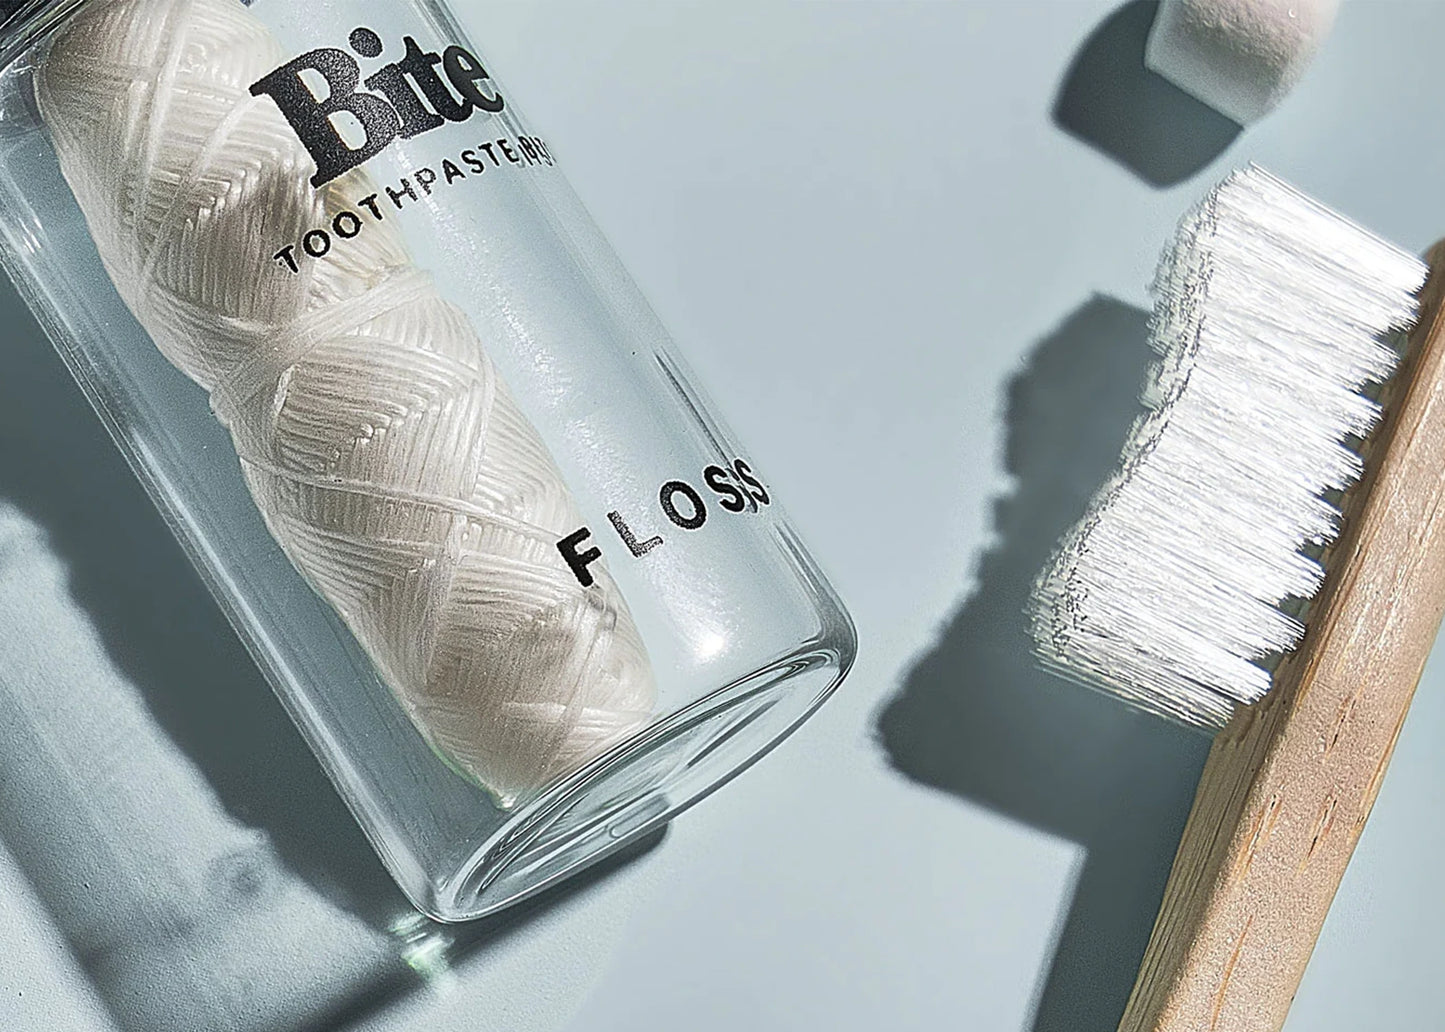 Bite Floss in a glass jar next to a toothbrush sold at Woodland Mod